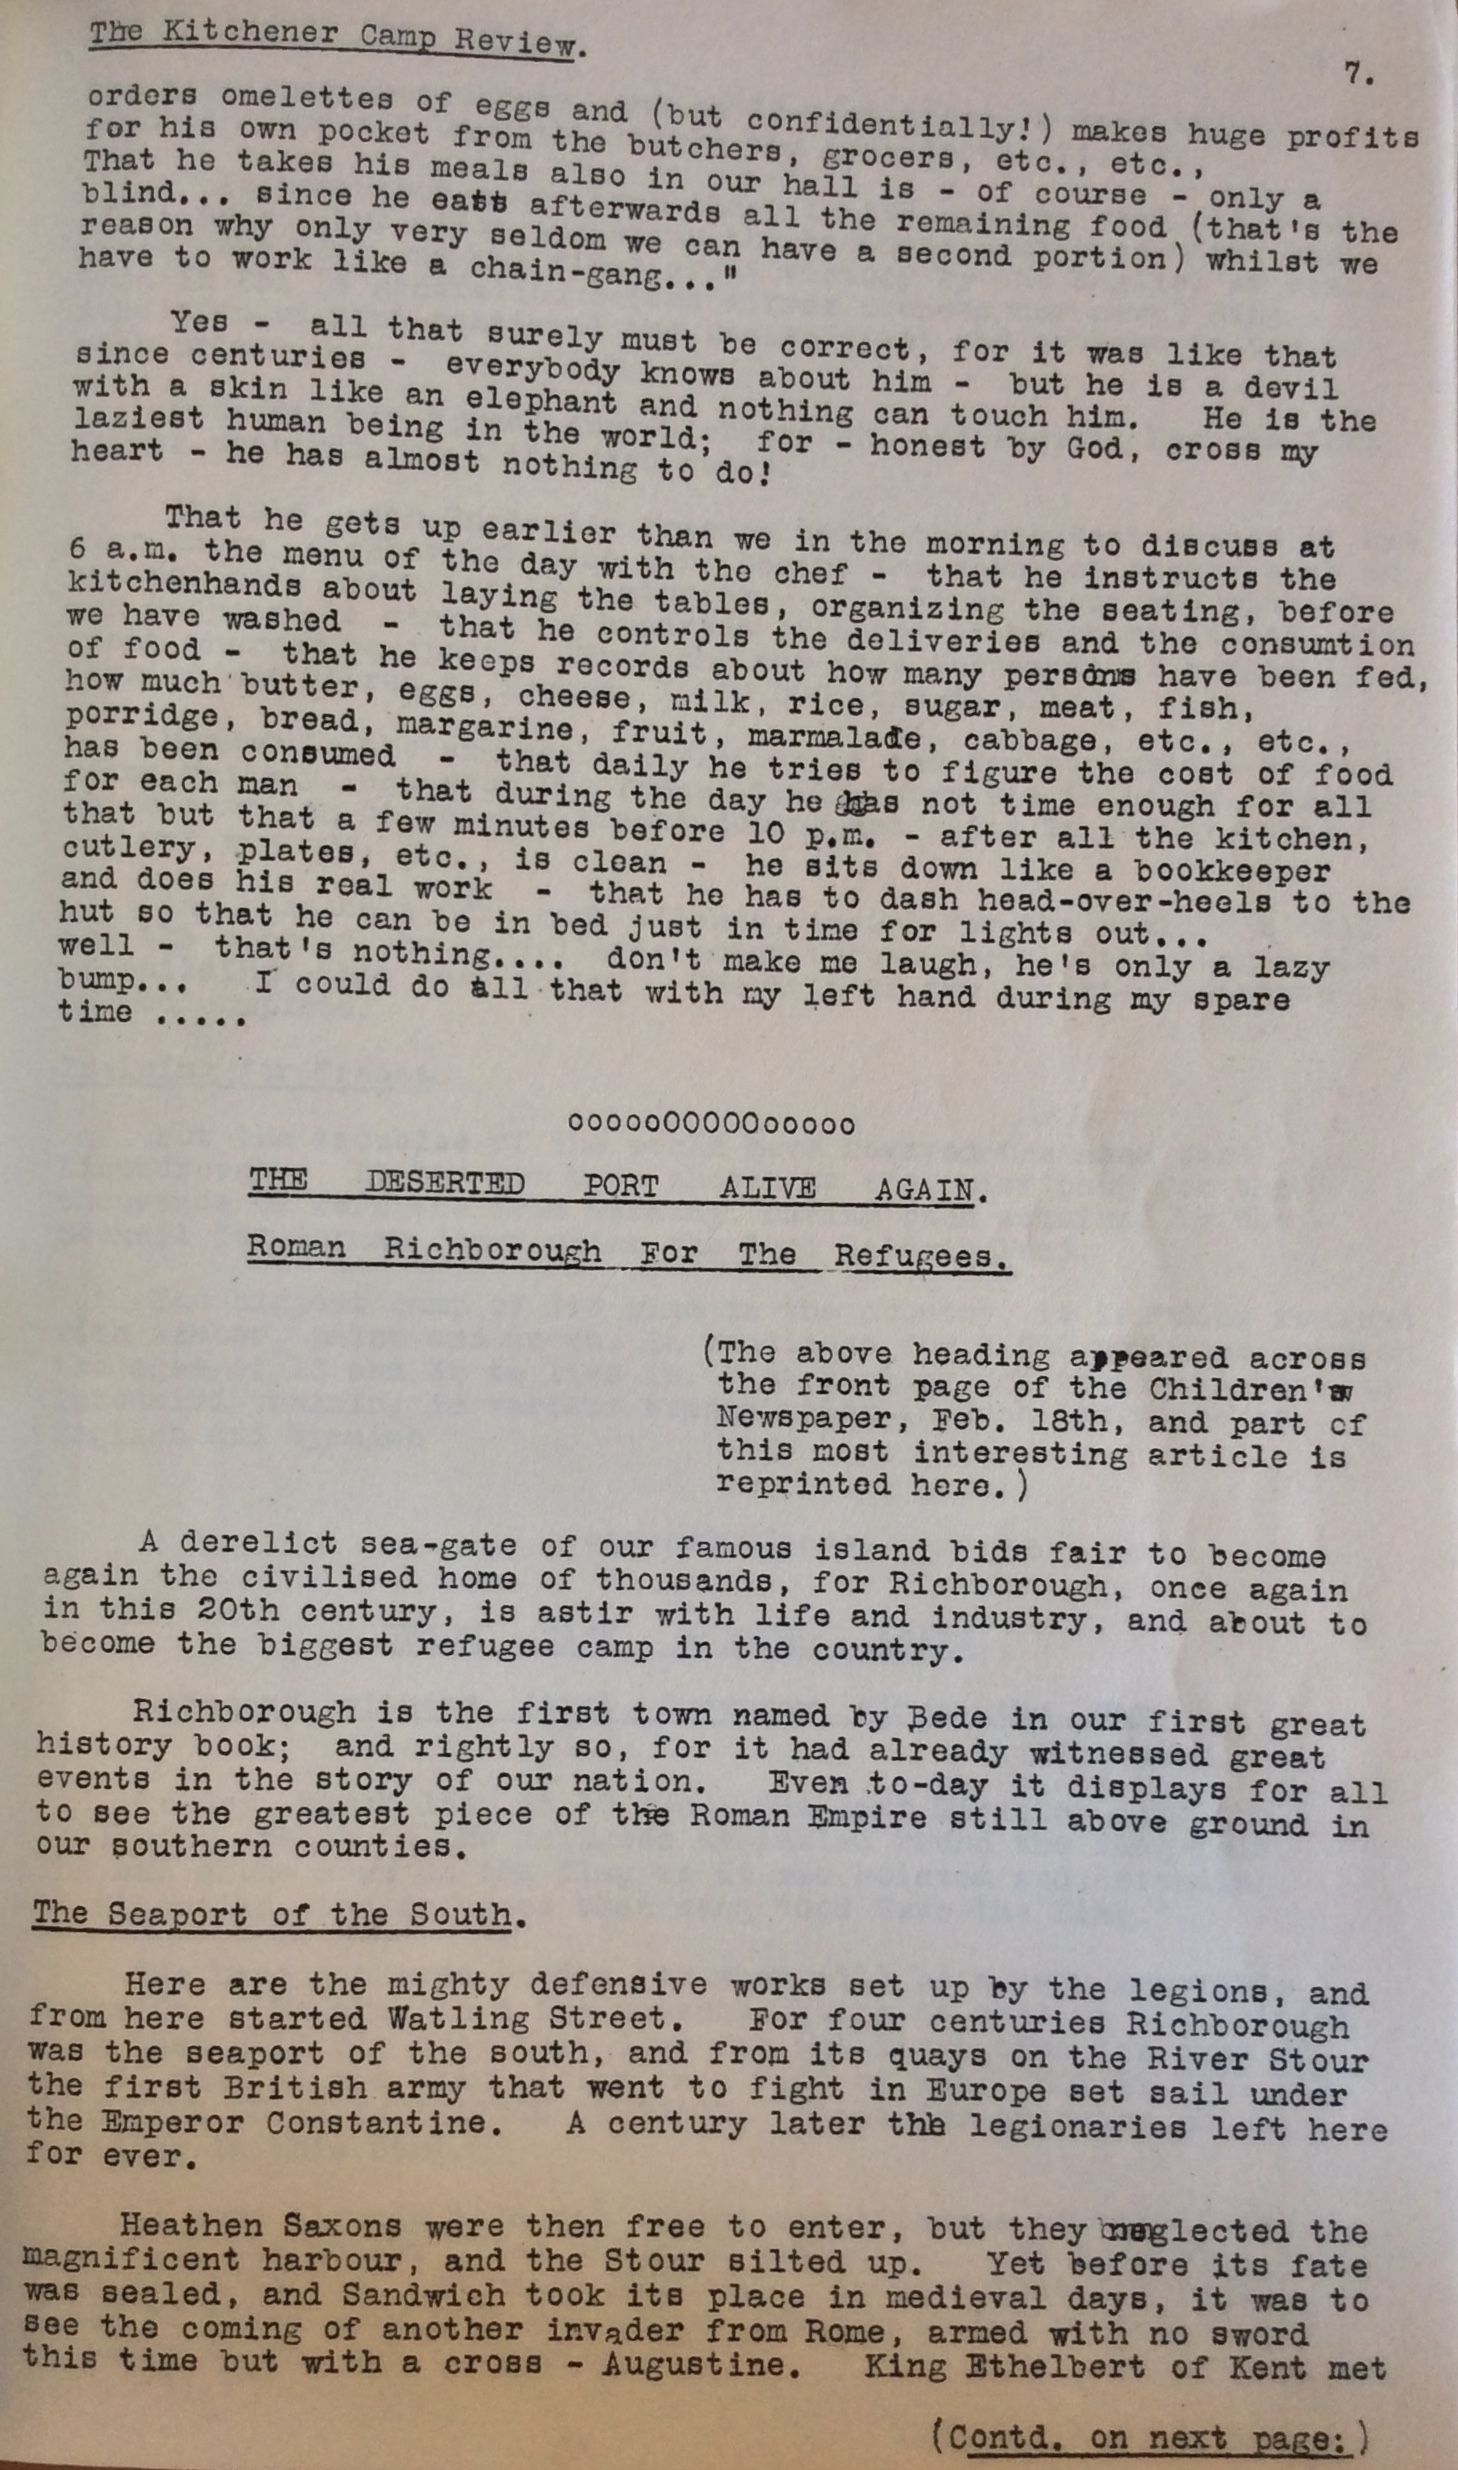 Kitchener Camp Review, No. 1, March 1939, page 7